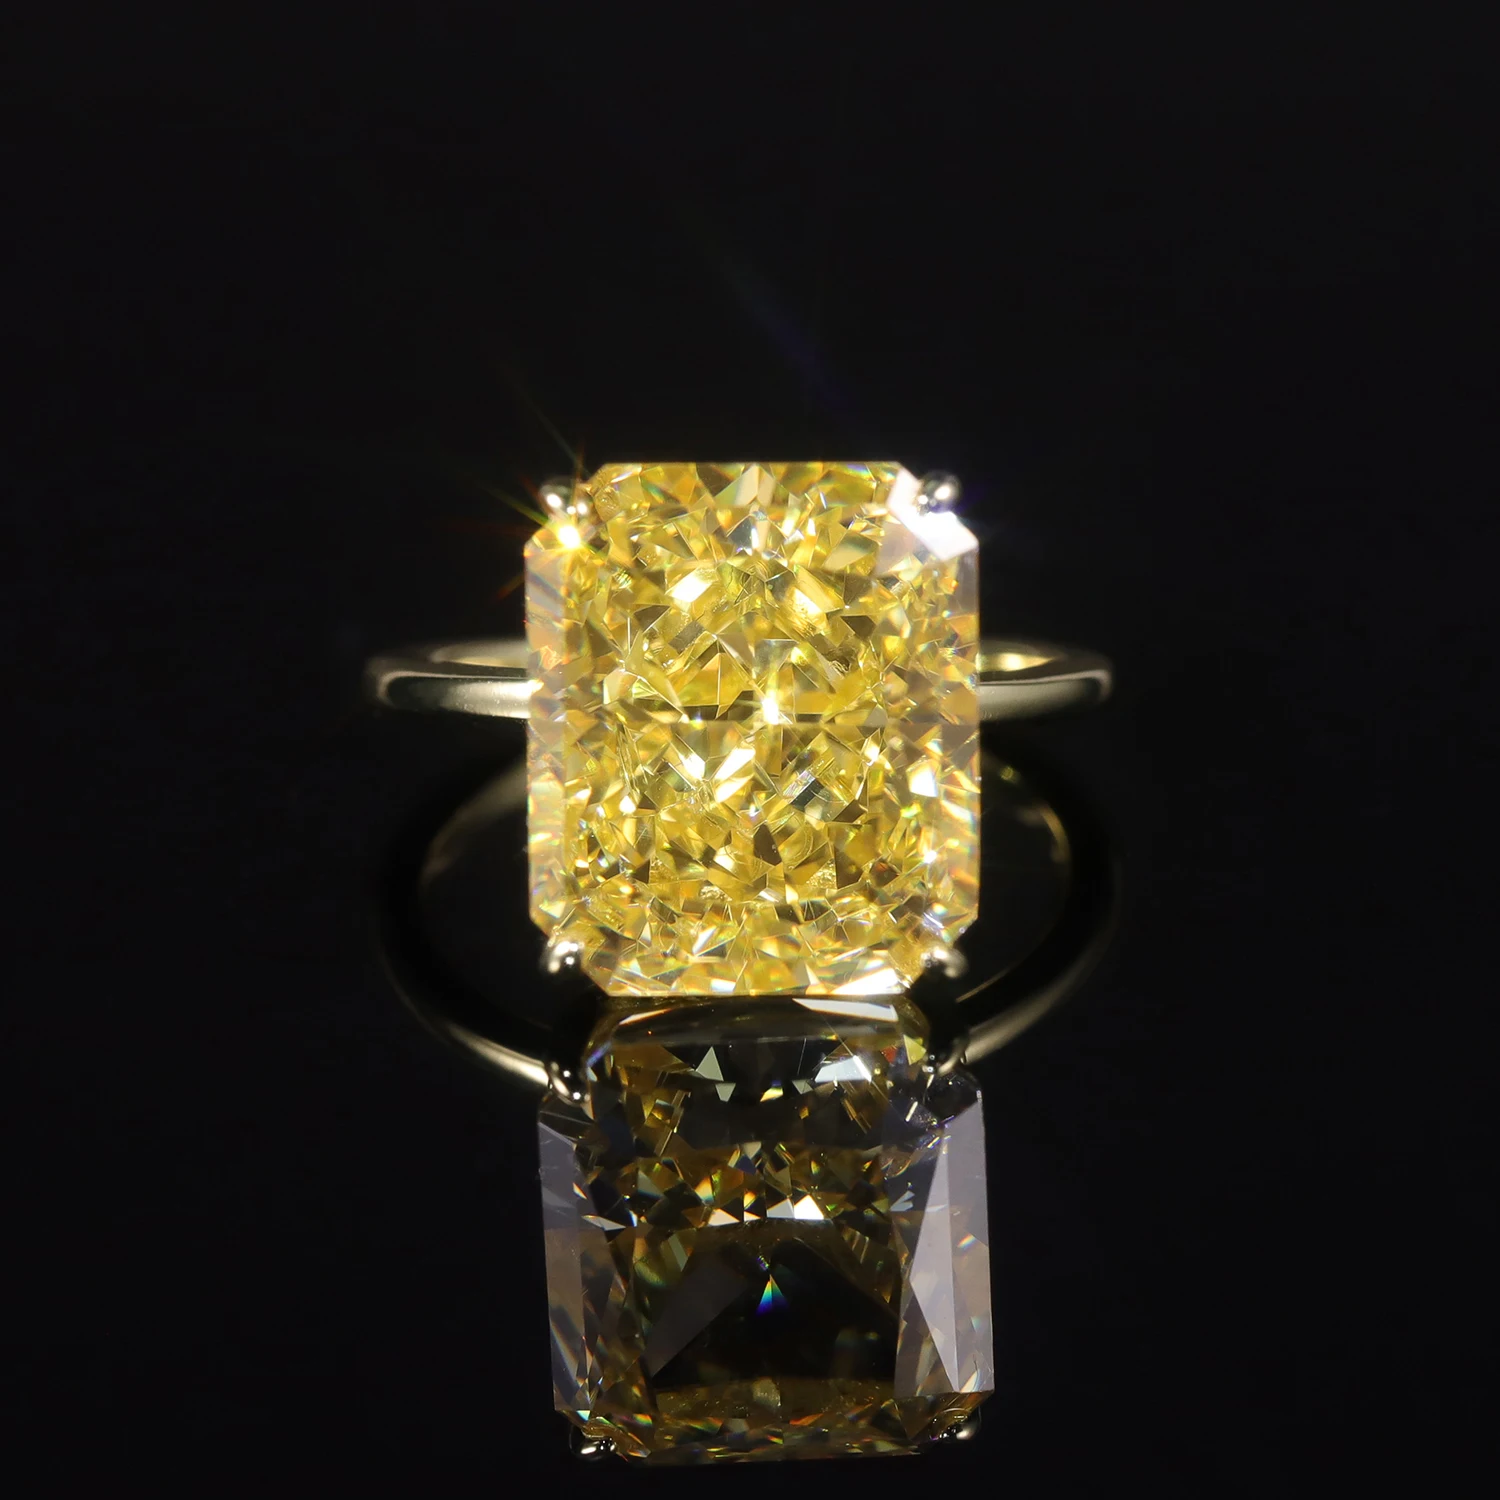 

GEM'S BALLET Diamond-fire CZ- Fancy Light Yellow Engagement Rings in 925 Sterling Silver Handmade Cocktail Ring Gift For Her